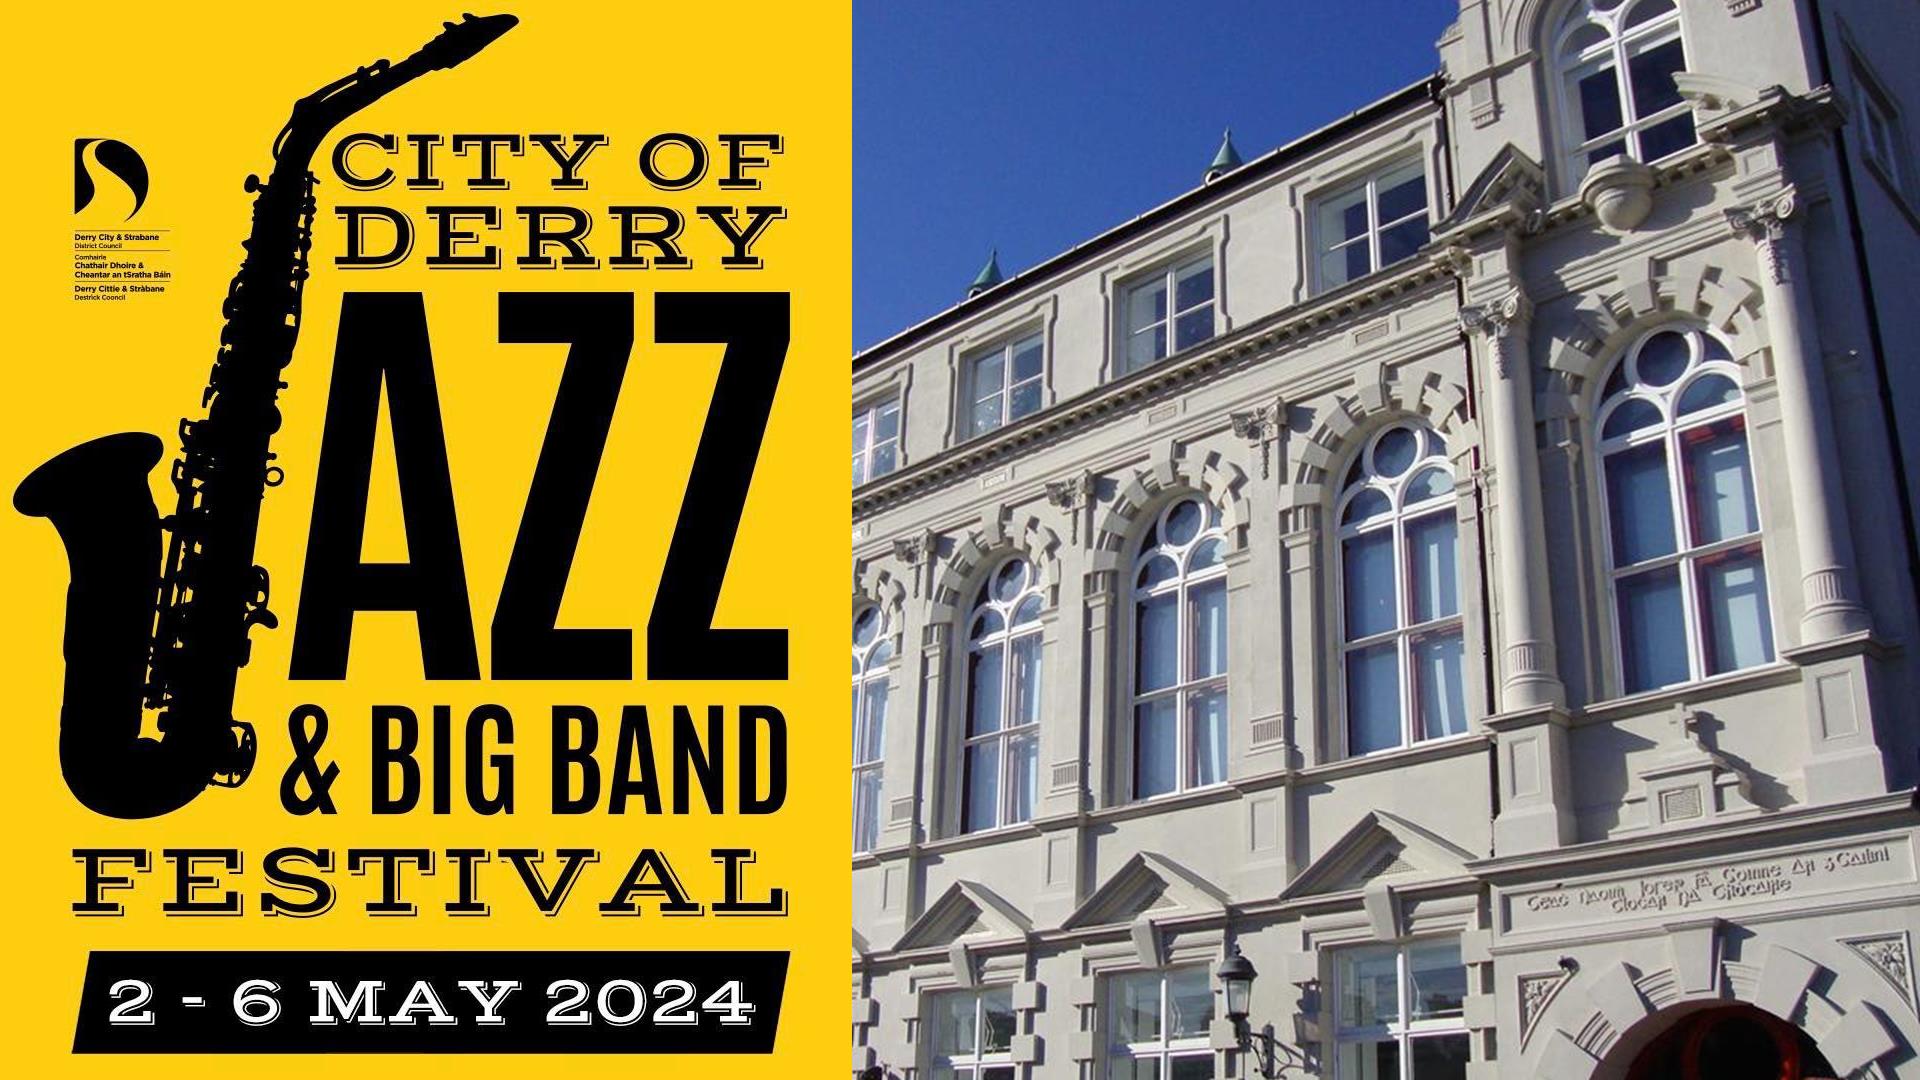 Exterior view of The Playhouse with the Jazz Festival logo.